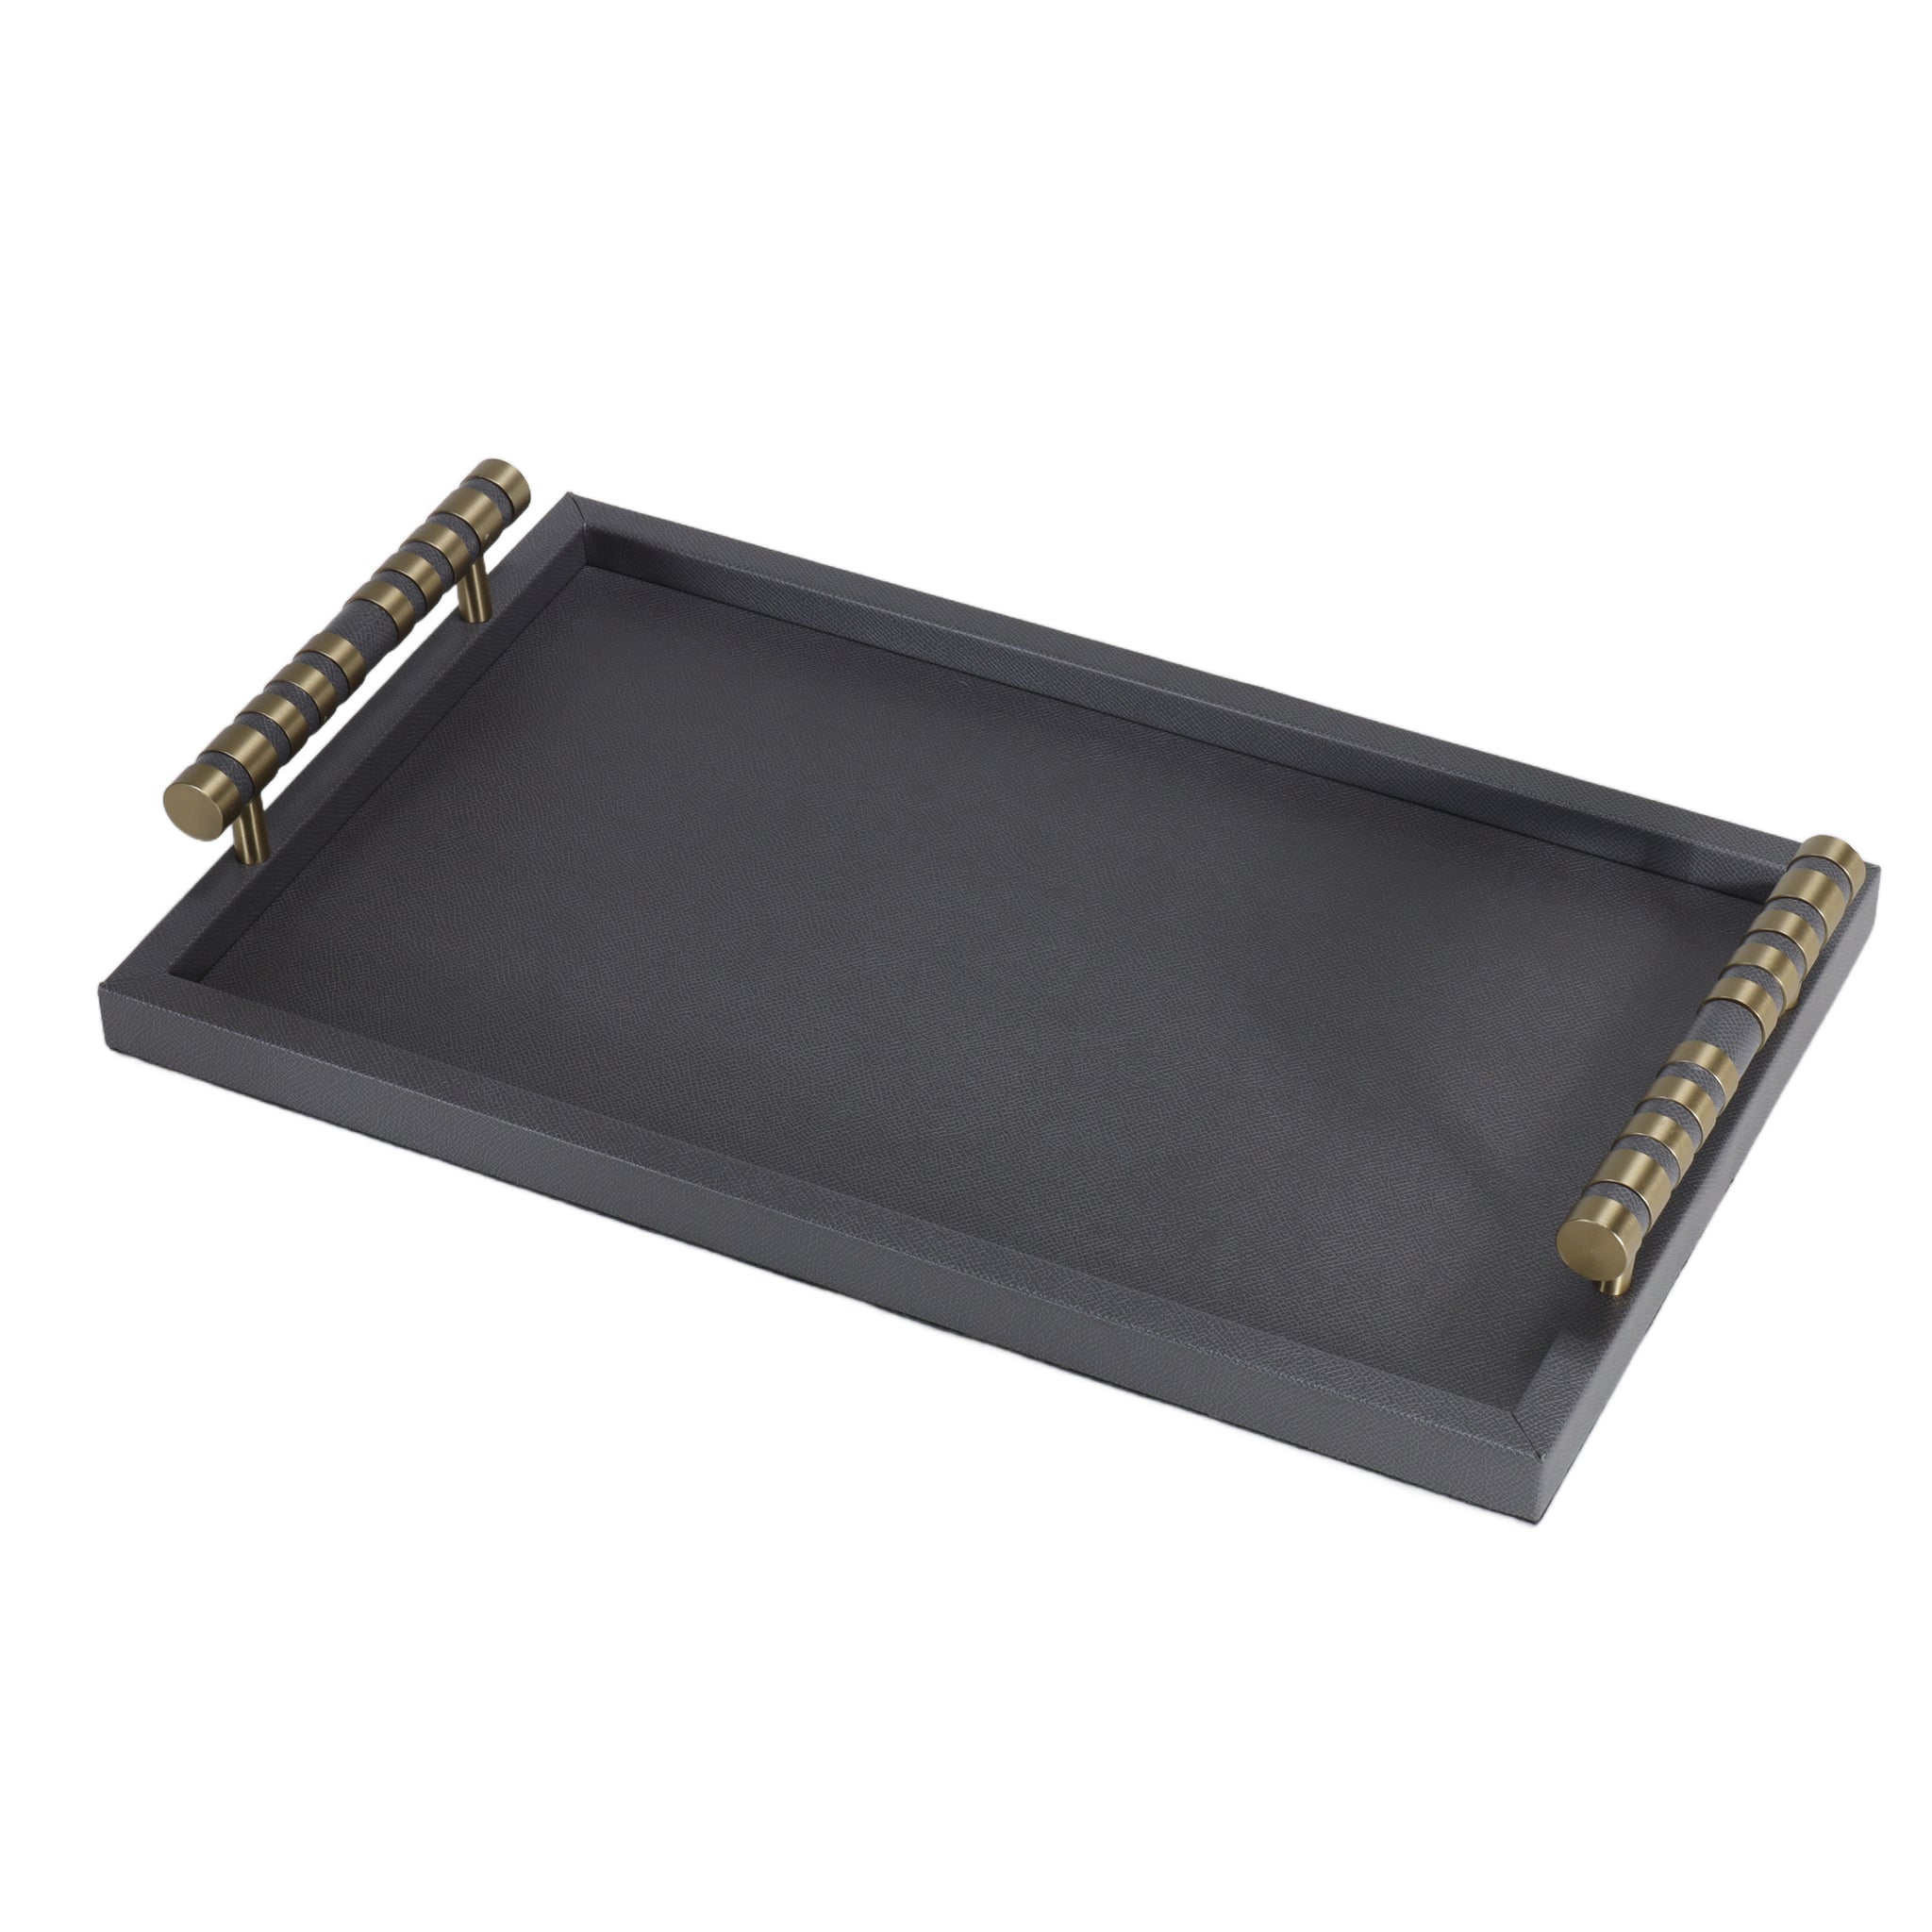 Grey Leather Serving Tray